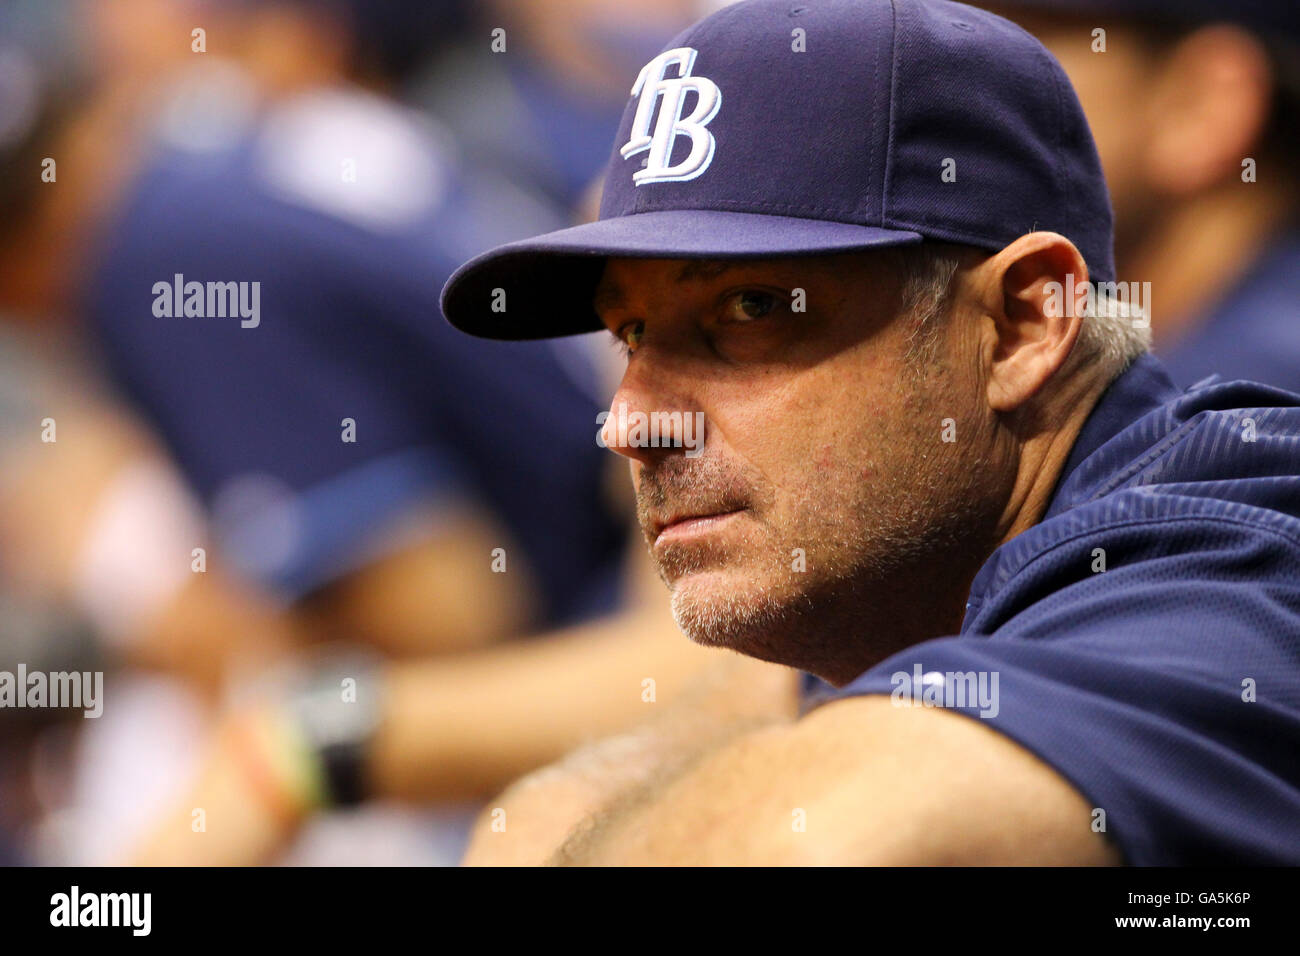 St. Petersburg, Florida, USA. 30th June, 2016. WILL VRAGOVIC | Times.Tampa Bay Rays hitting coach Derek Shelton (17) in the dugout during the game between the Detroit Tigers and the Tampa Bay Rays in Tropicana Field in St. Petersburg, Fla. on Thursday, June 30, 2016 © Will Vragovic/Tampa Bay Times/ZUMA Wire/Alamy Live News Stock Photo